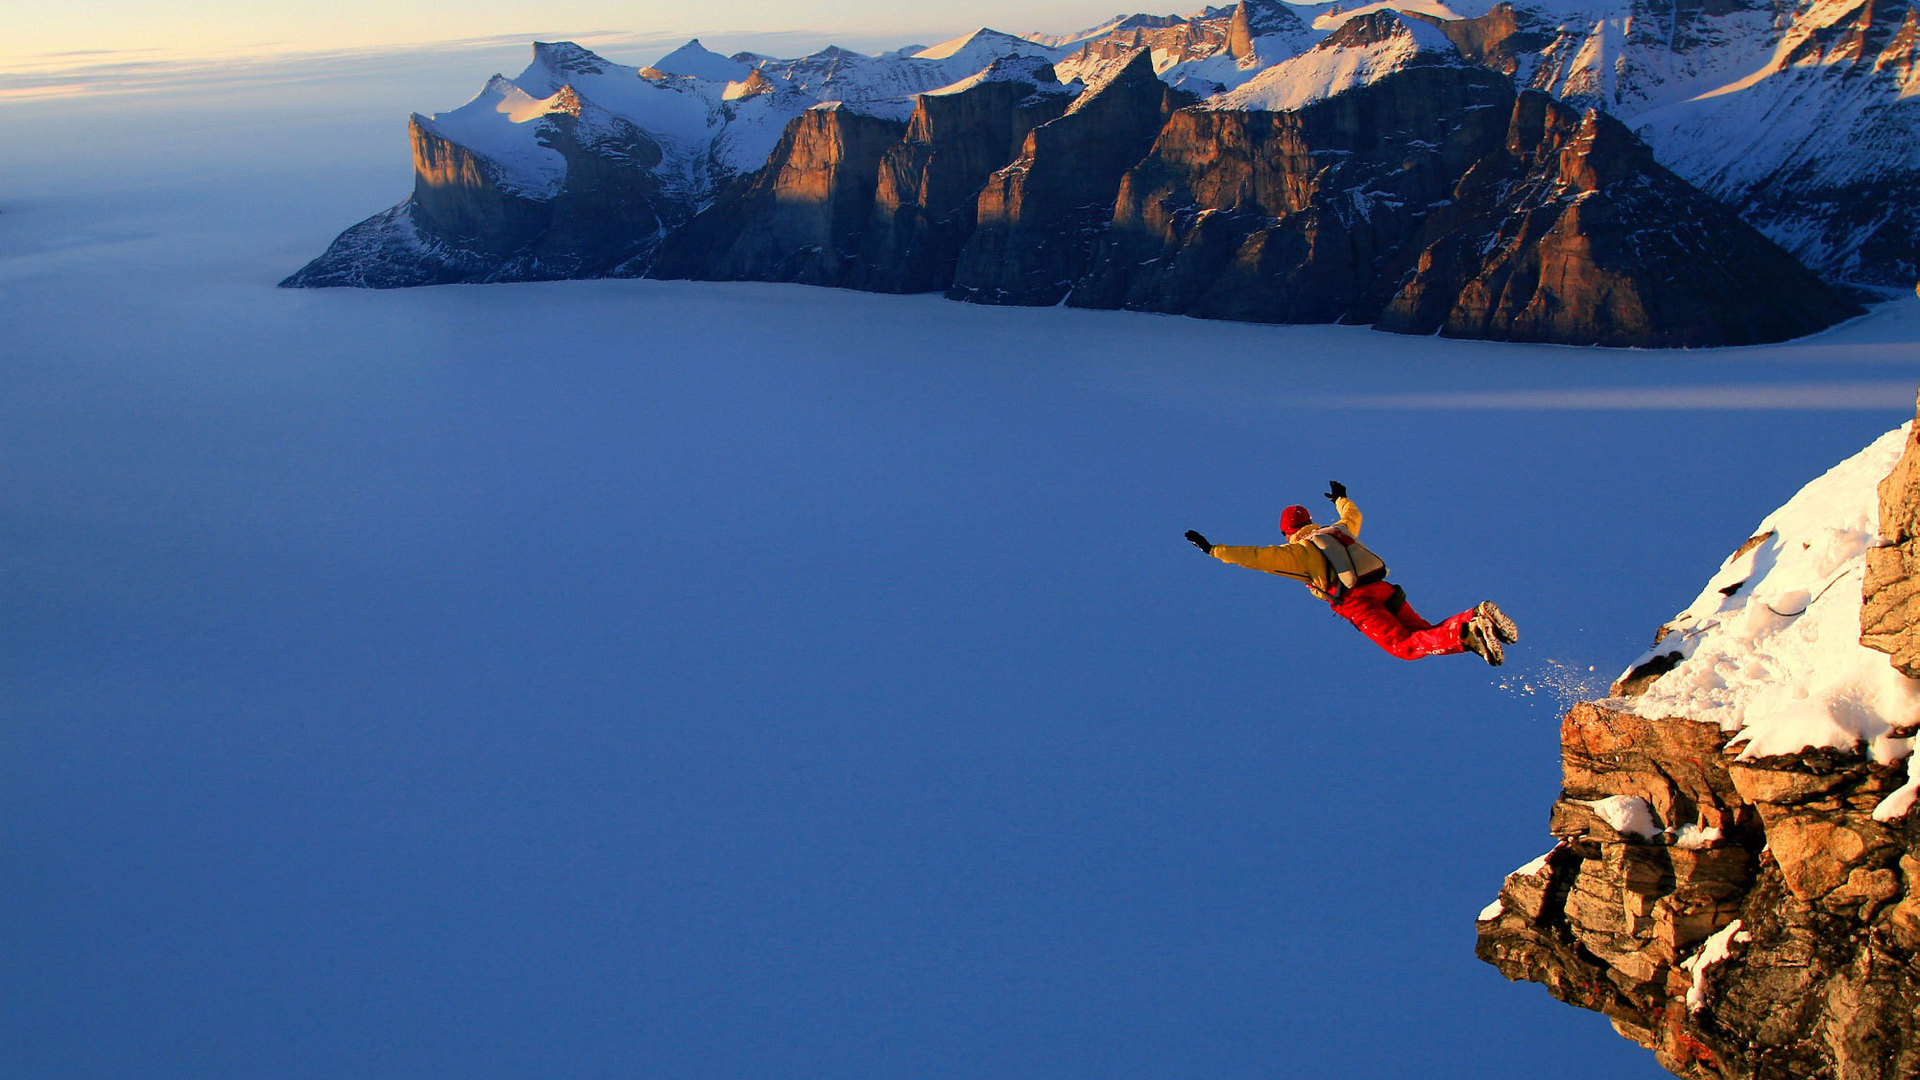 Parachuting: Extreme recreational activity and a competitive sport, Jumping from a cliff. 1920x1080 Full HD Wallpaper.